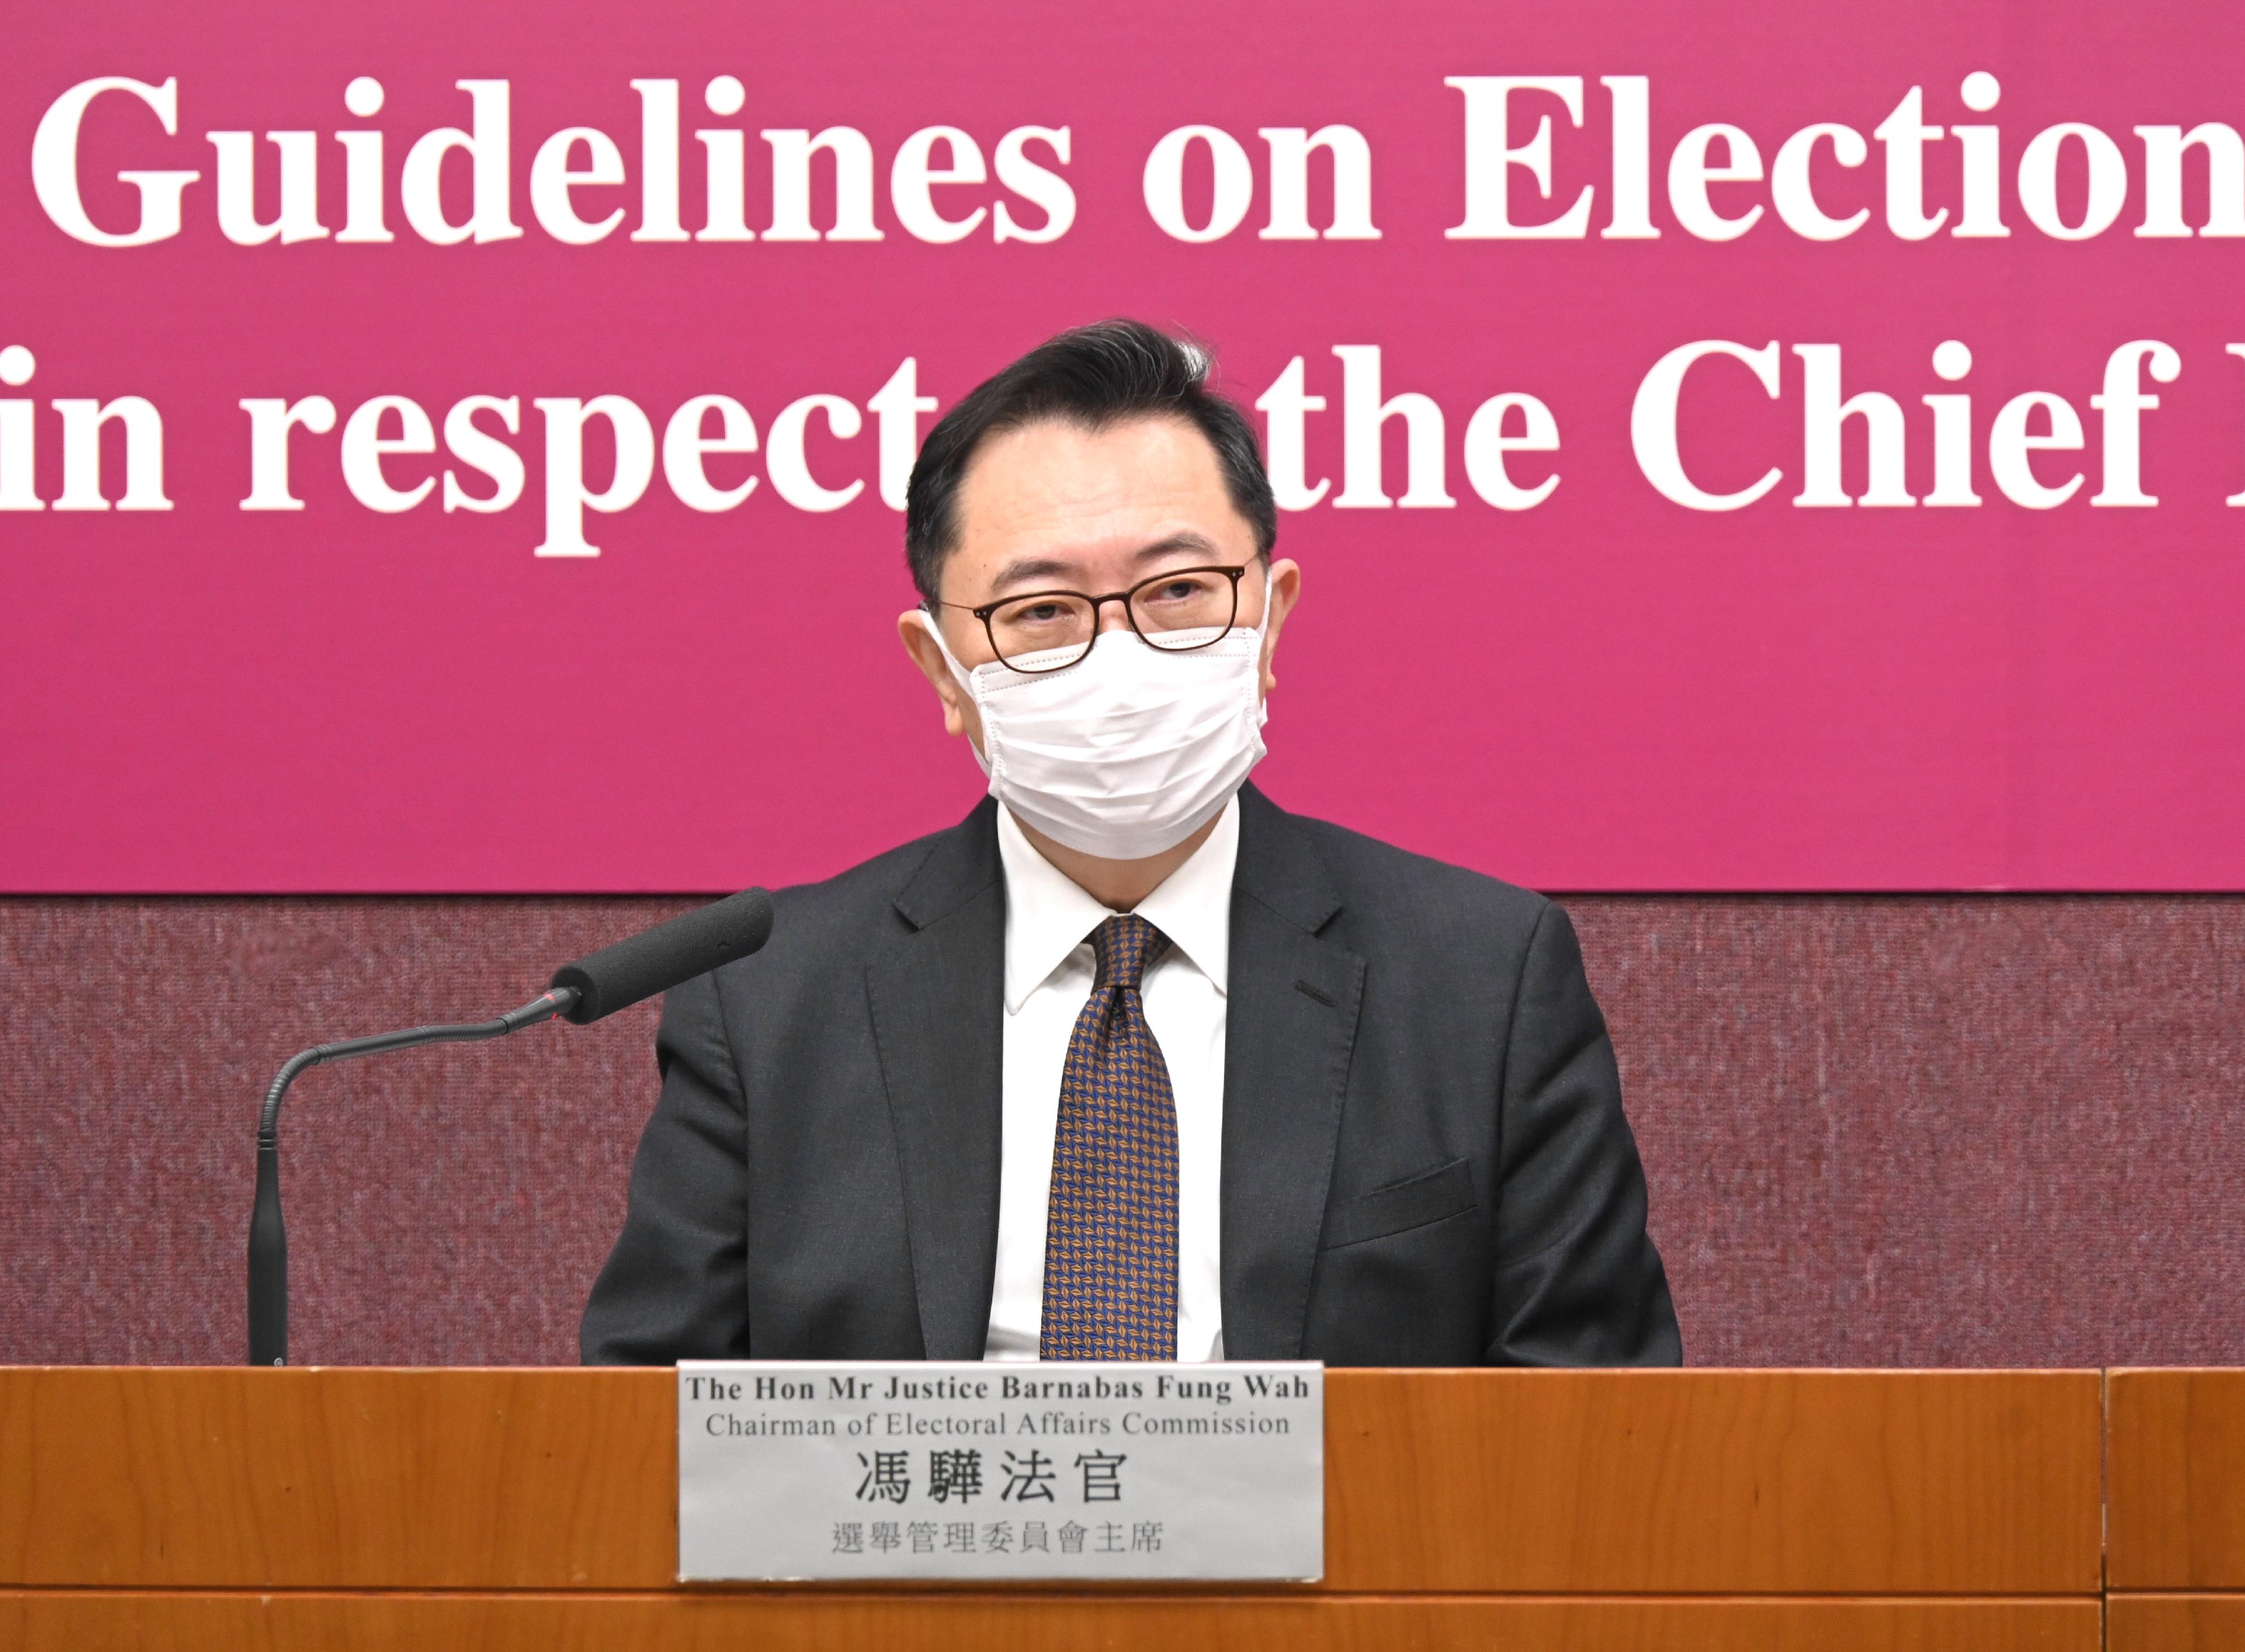 The Chairman of the Electoral Affairs Commission, Mr Justice Barnabas Fung Wah, today (January 27) hosts the press conference on the Guidelines on Election-related Activities in respect of the Chief Executive Election.